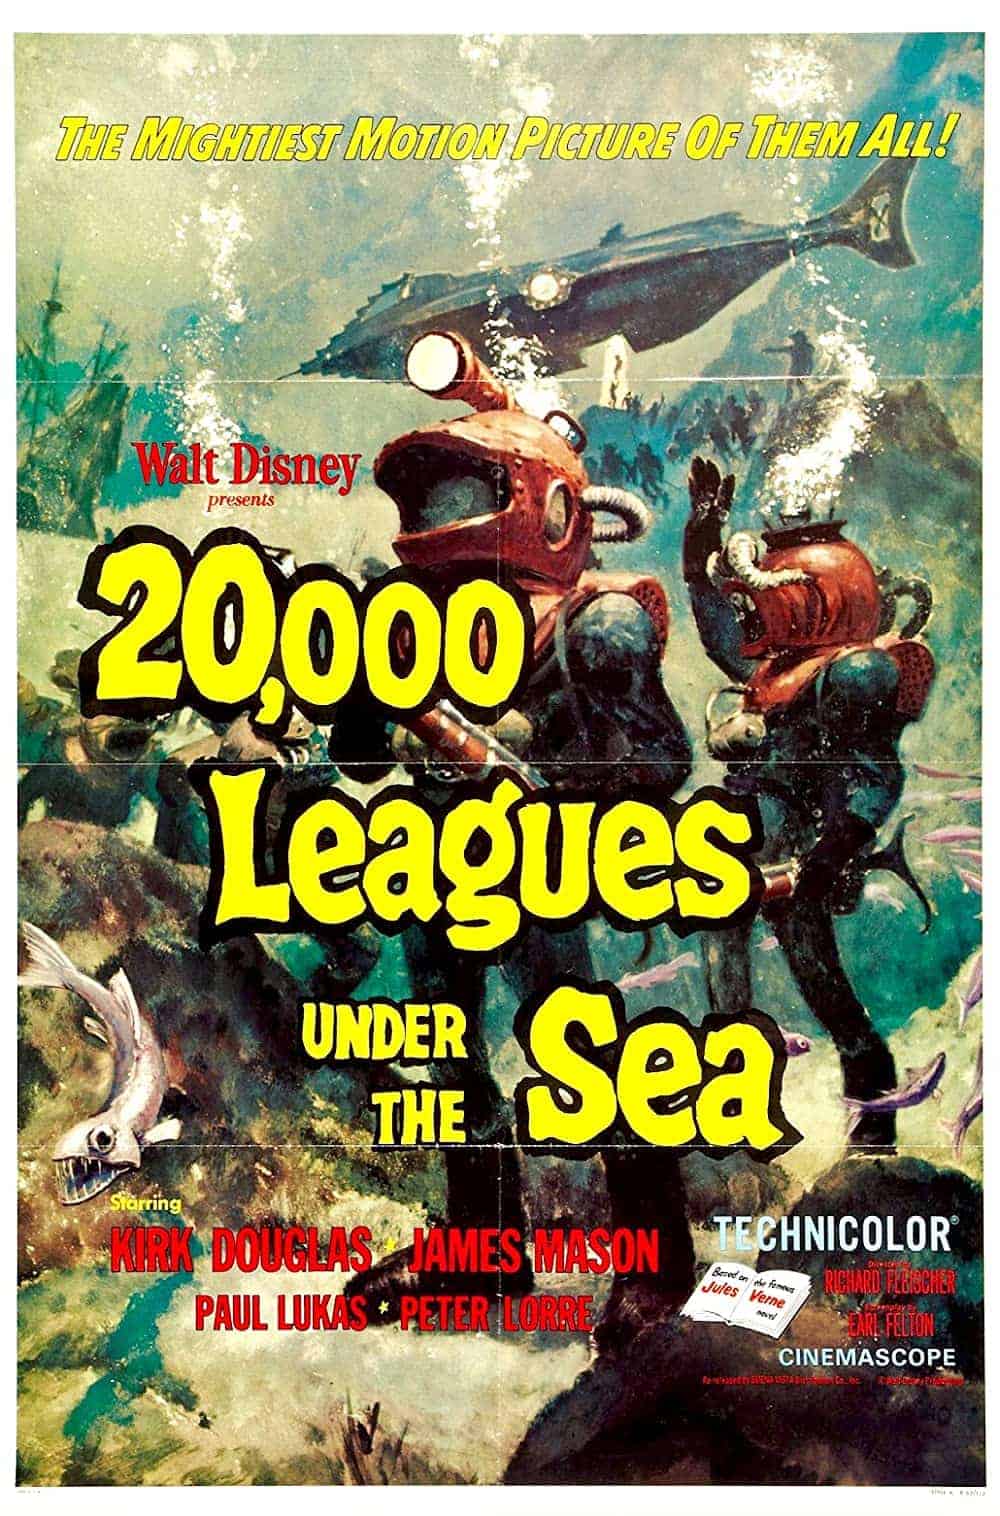 20,000 Leagues Under the Sea (1954) 15 Best Steampunk Movies to Check Out